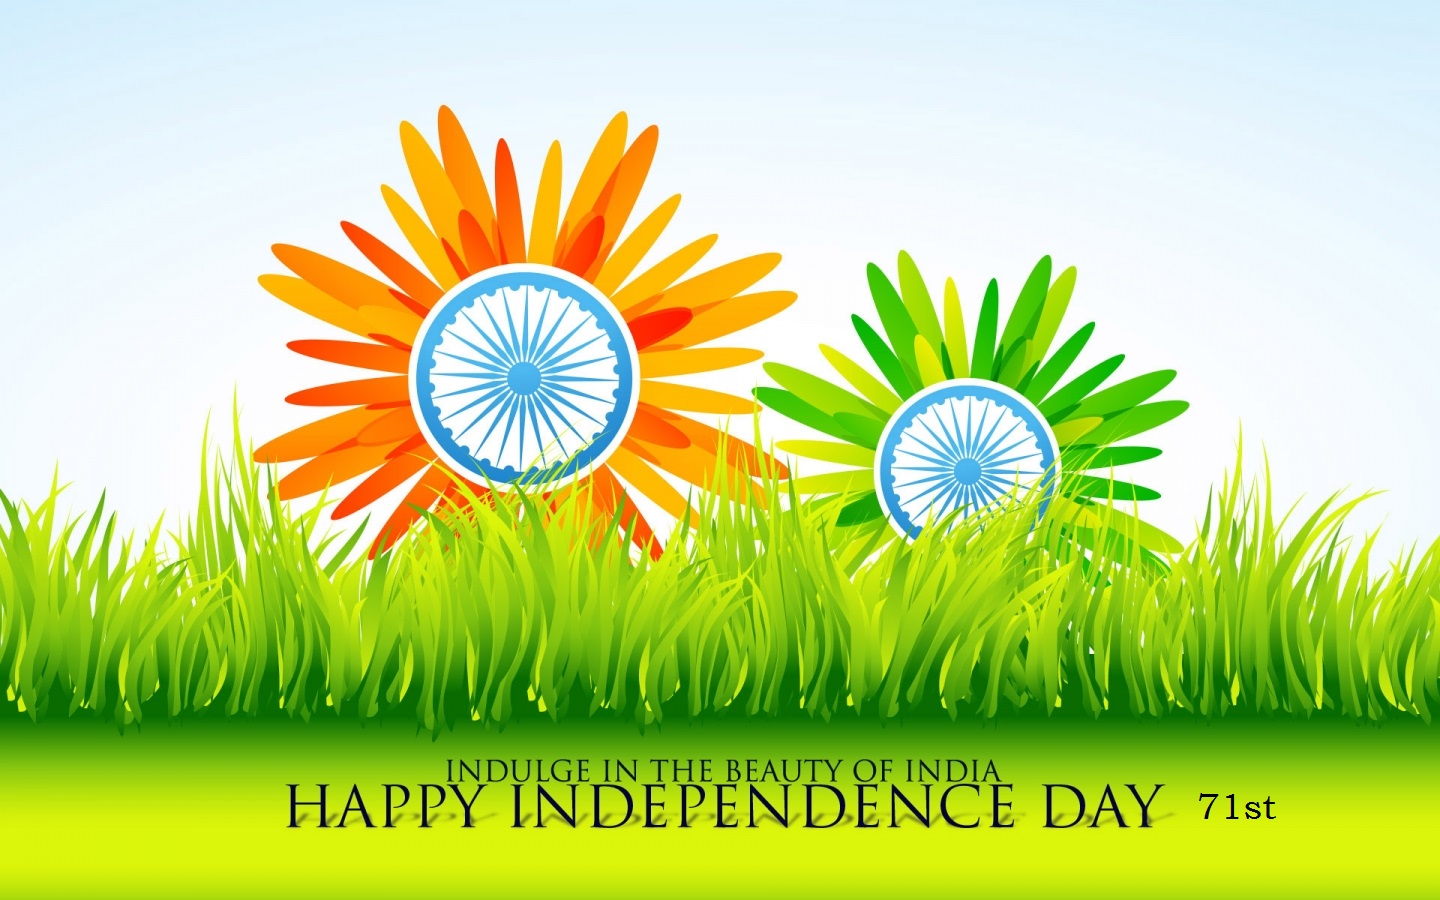 Corporate Office Decoration Ideas On Independence Day My Decorative